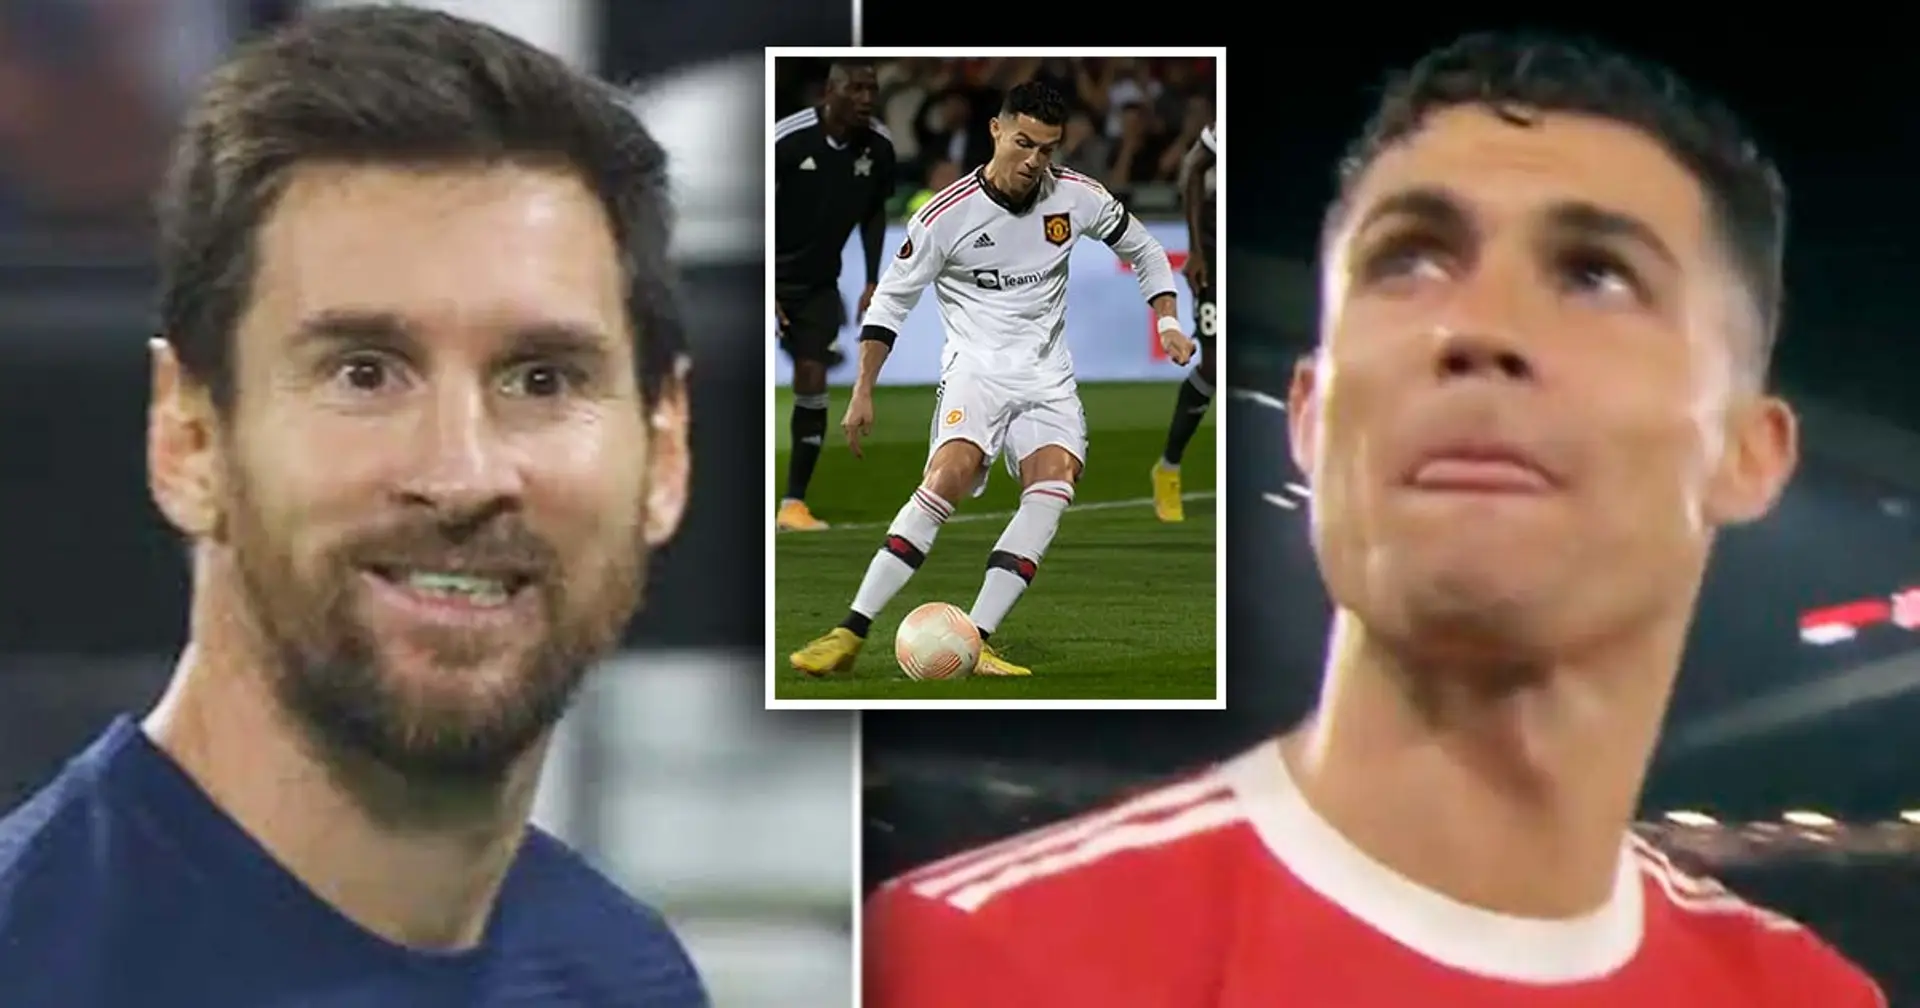 Messi beats Ronaldo to become player with most non-penalty goals in history